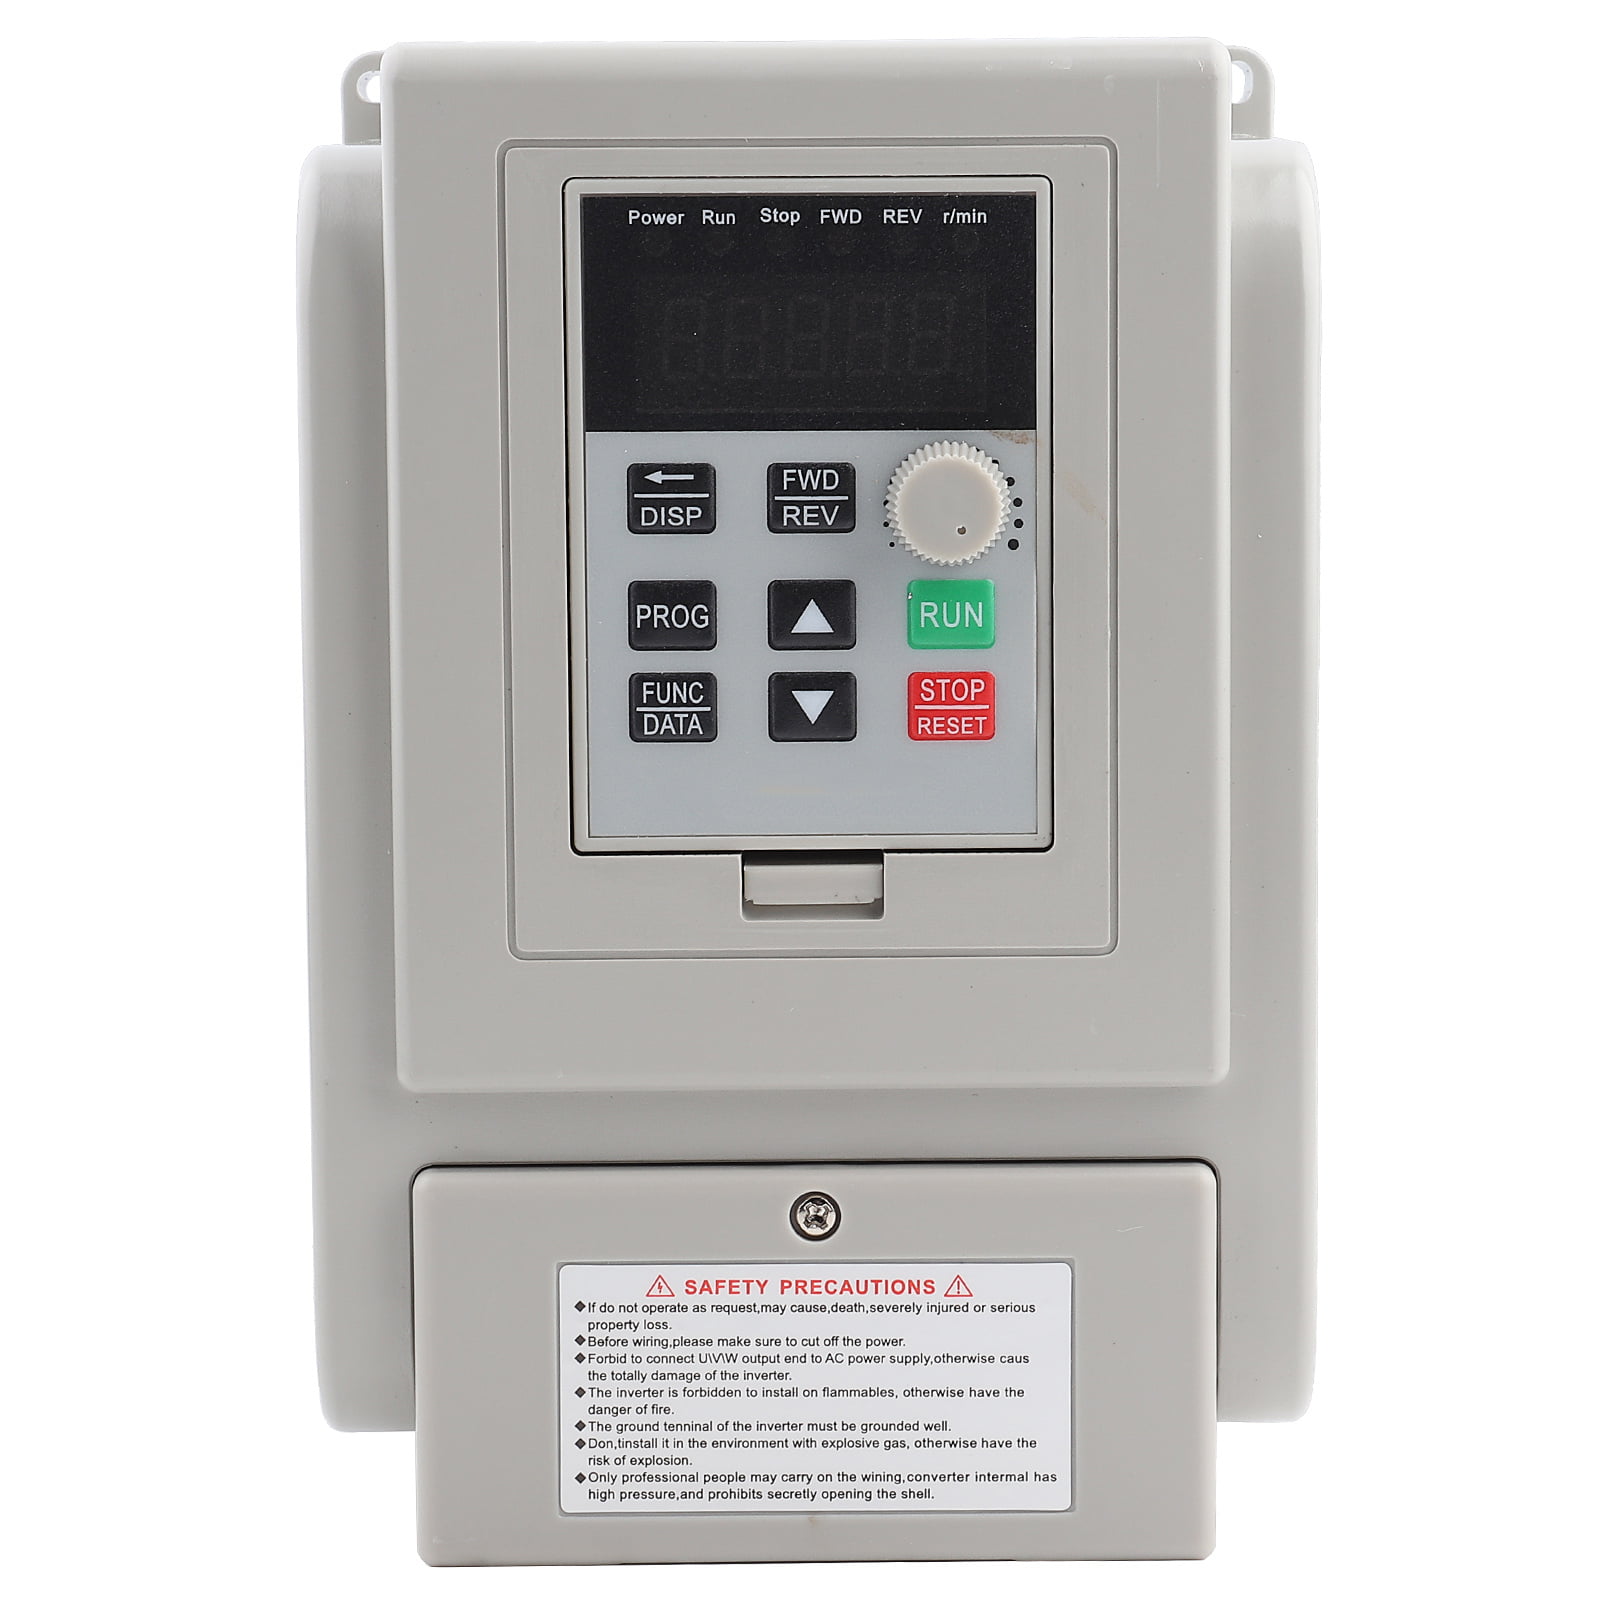 VFD Current Type AC 220V Automated Industry Sport Control for Industrial Supplies Industrial Control 1.5kW 8A Variable Speed Drive